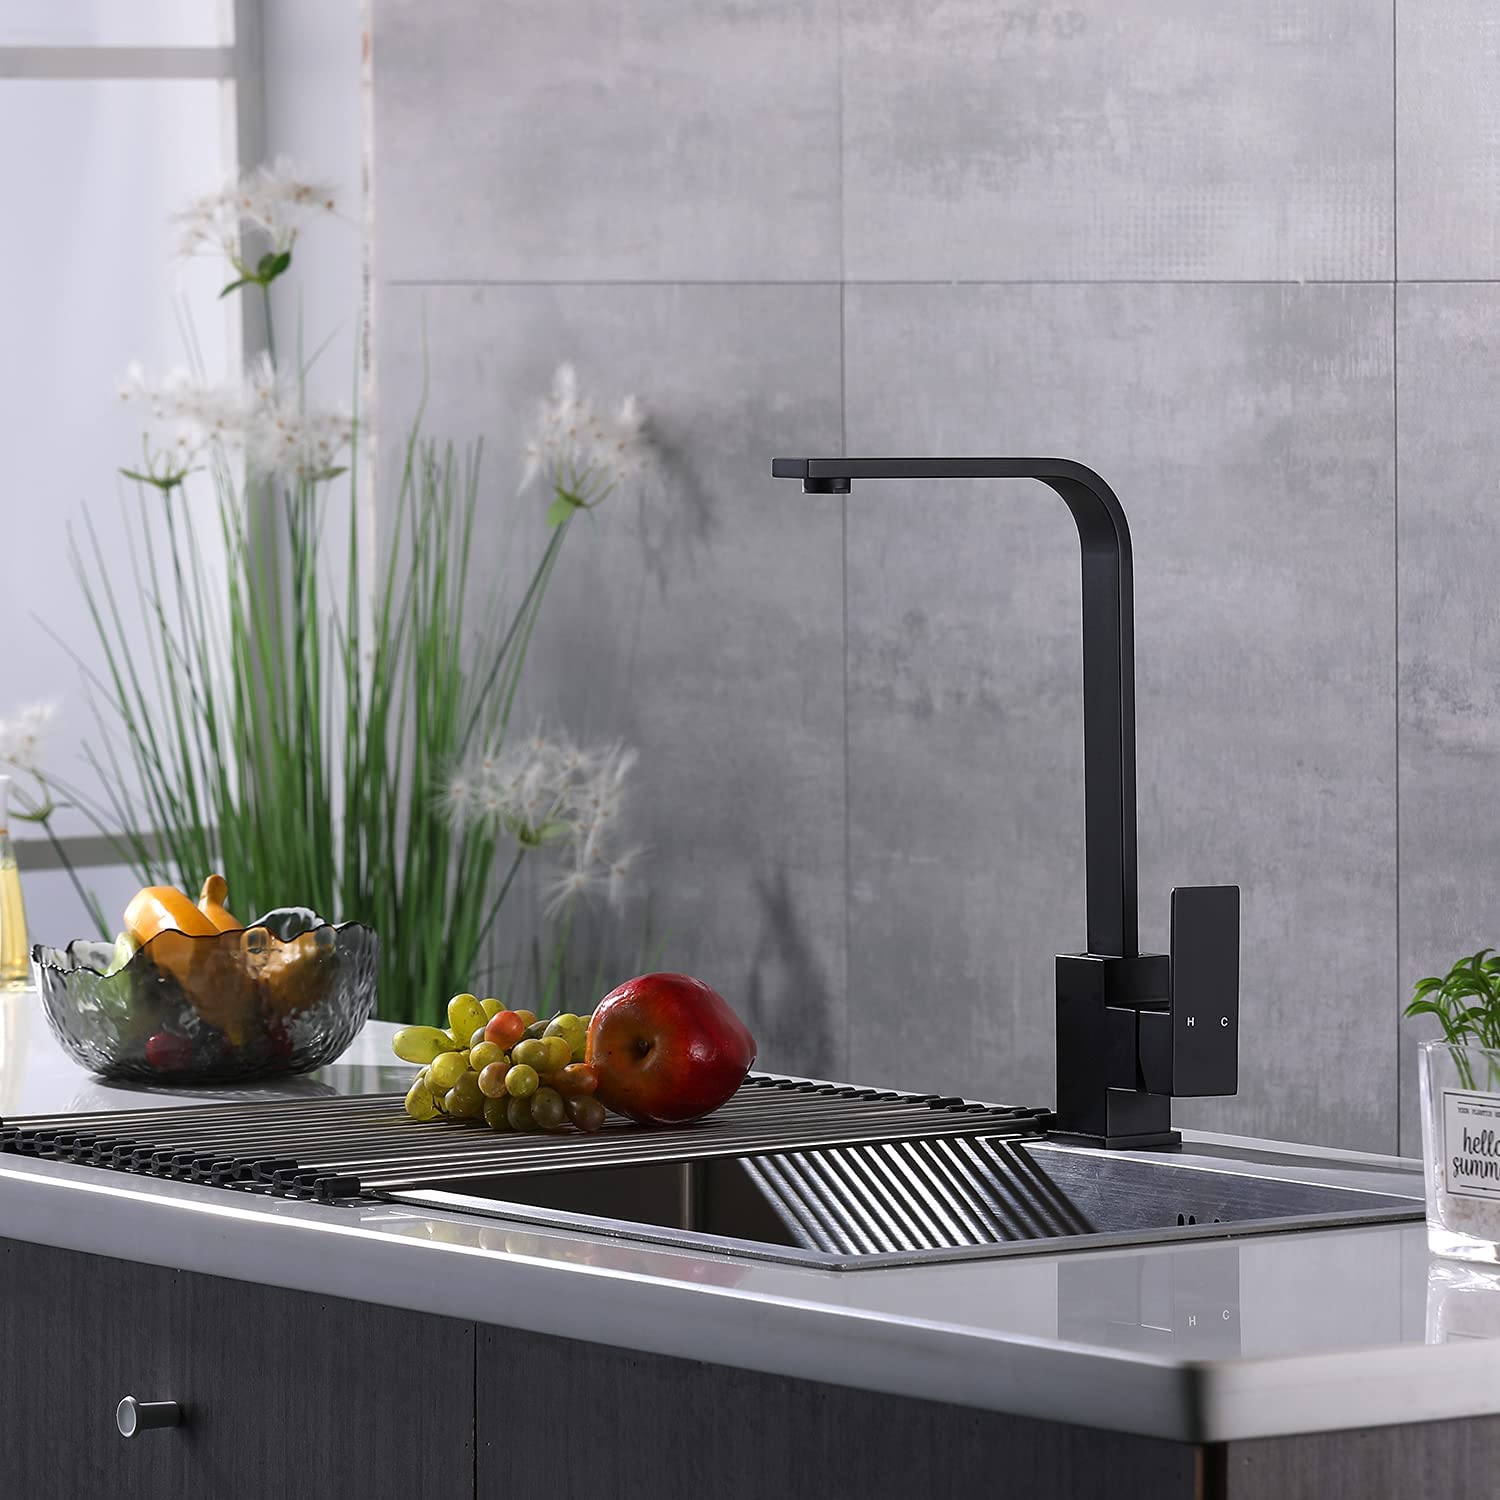 How to choose a kitchen sink and faucet?